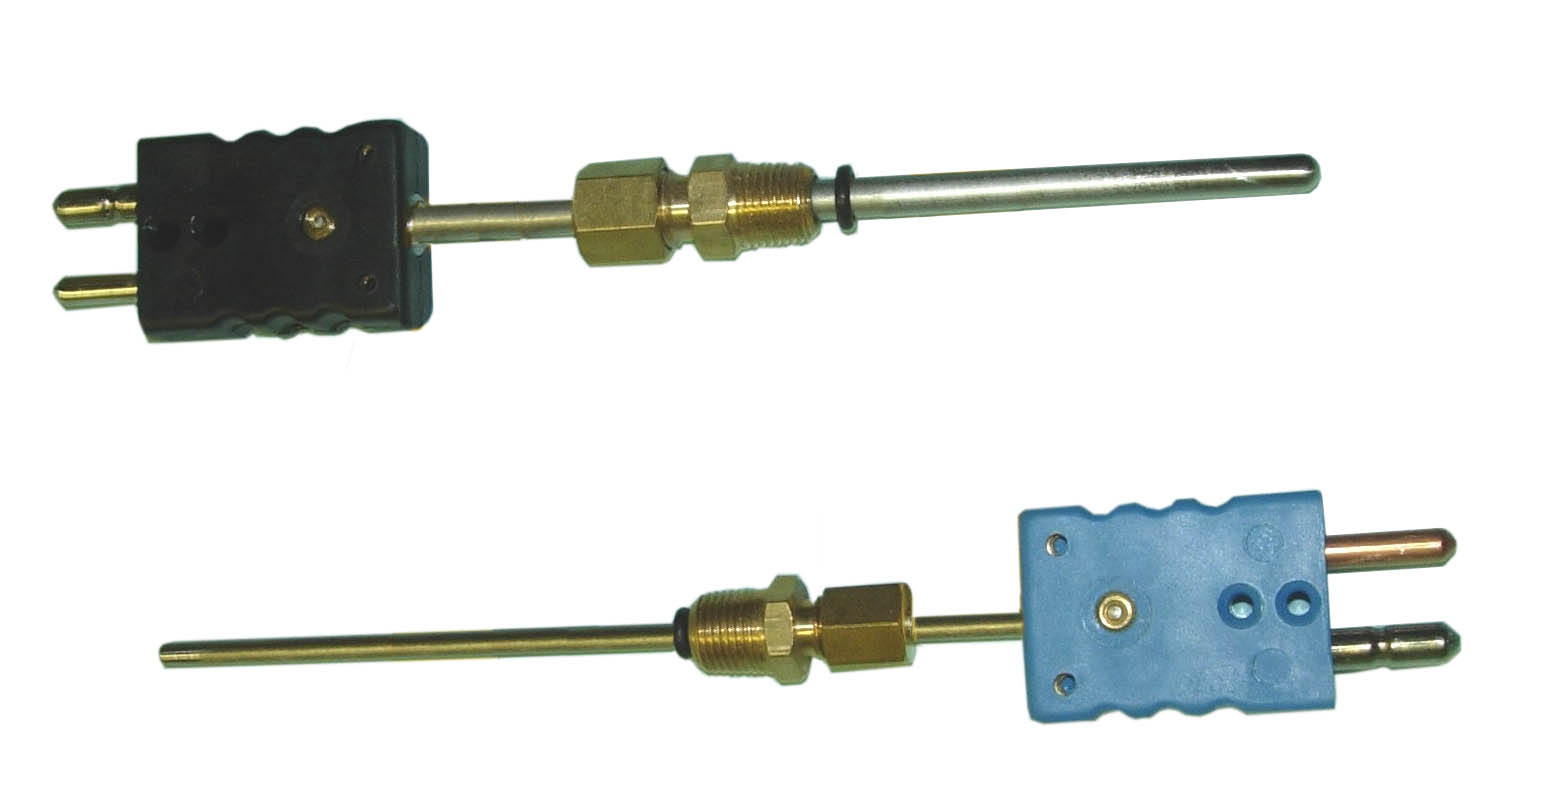 Thermocouples with compression fitting and plug